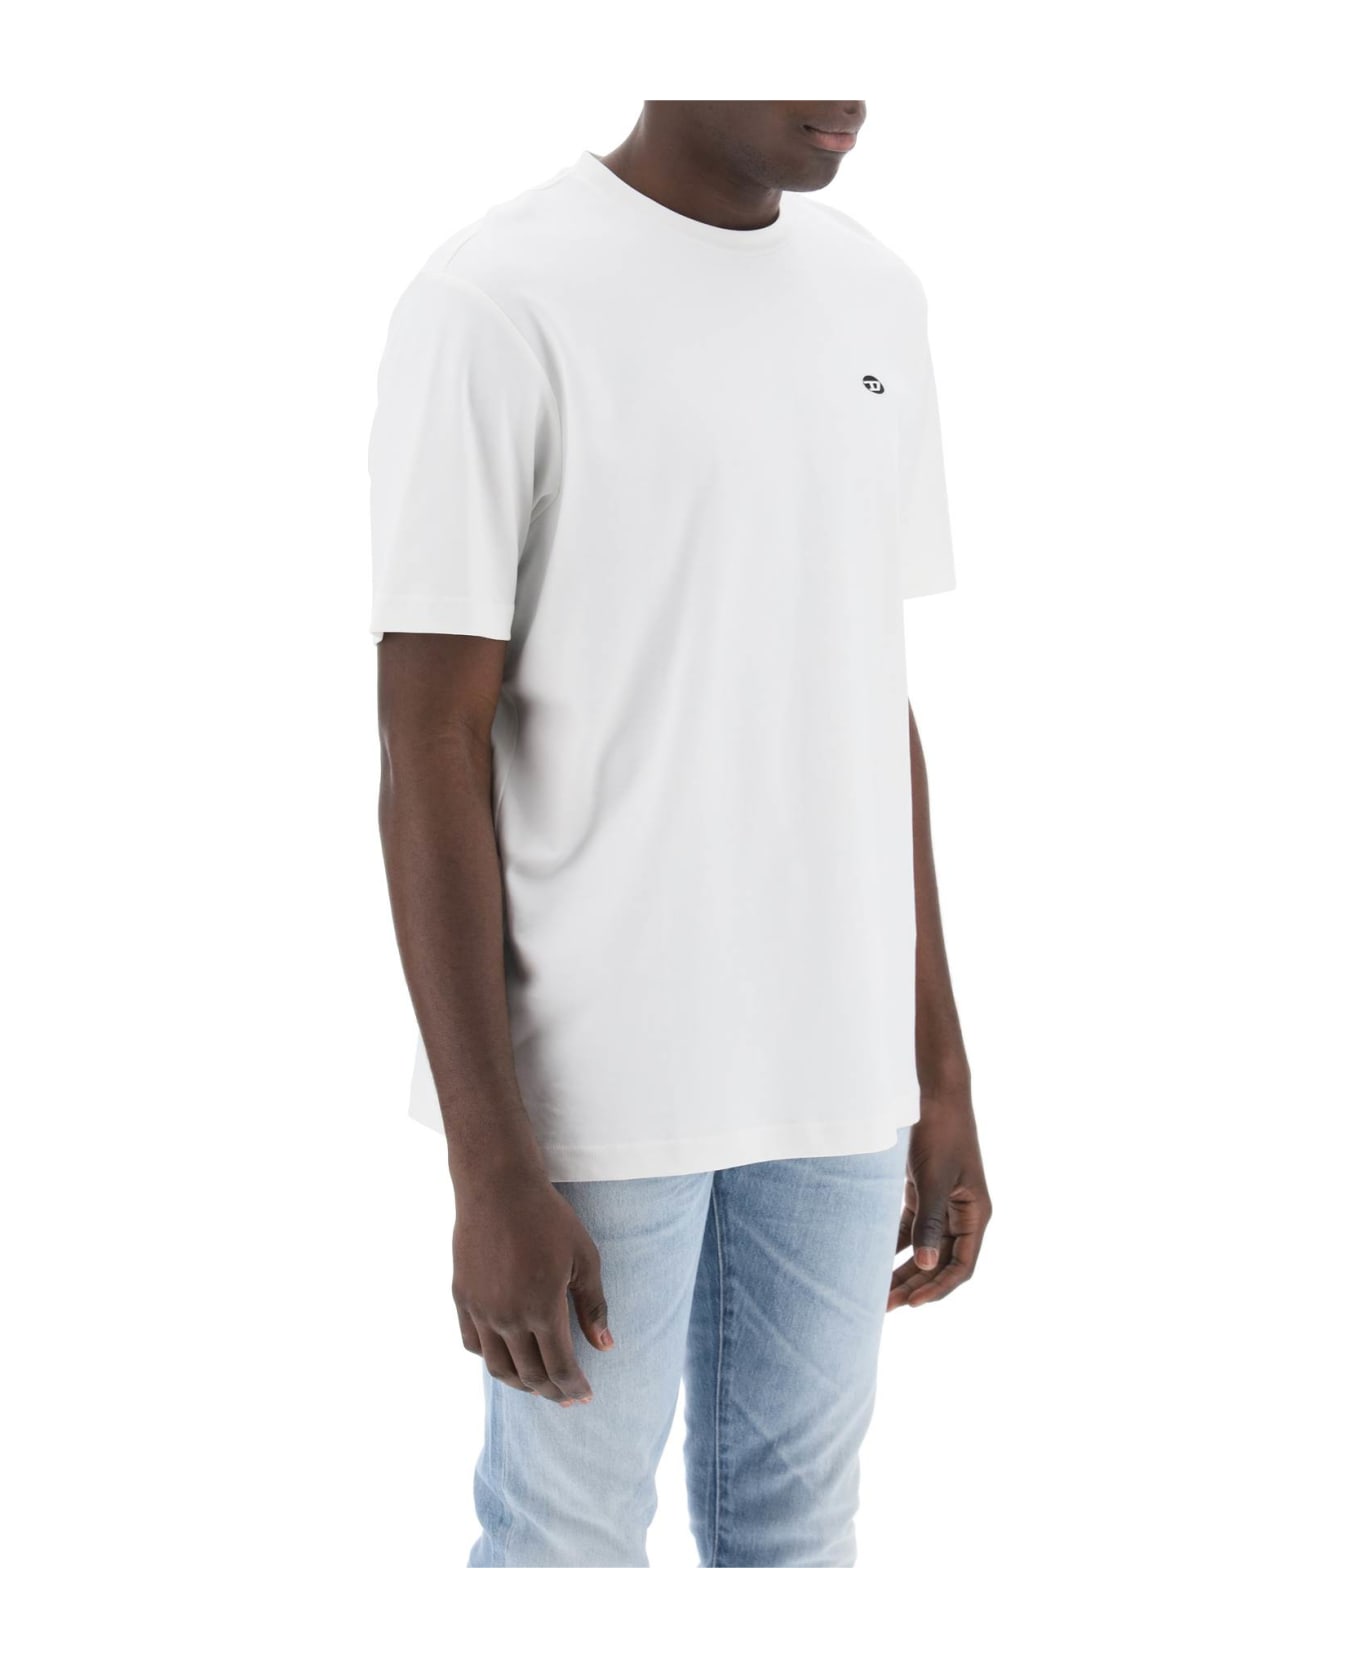 Diesel T-just-doval-pj Crewneck T-shirt - OFF WHITE (White)